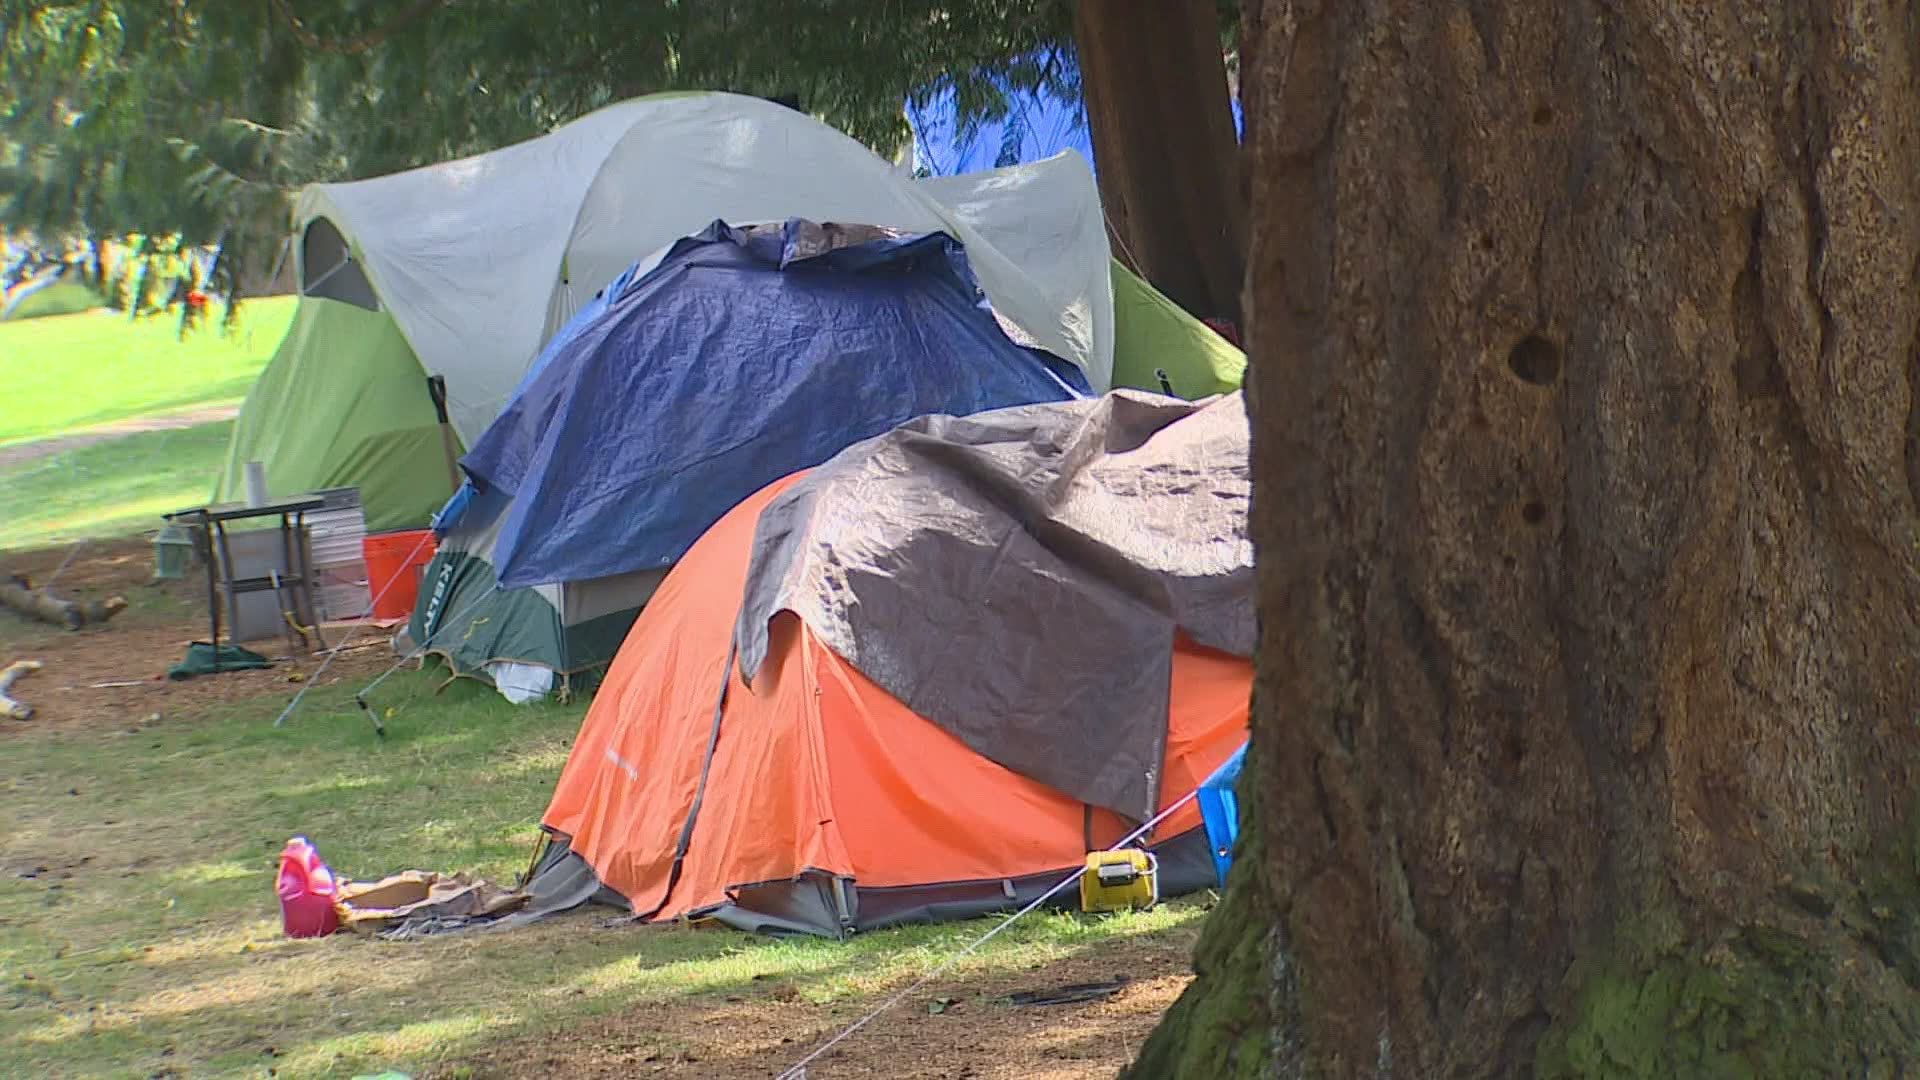 Seattle Mayor Jenny Durkan's office said it's Seattle Public Schools' responsibility to clear the encampment, and SPS has declined the city's assistance.